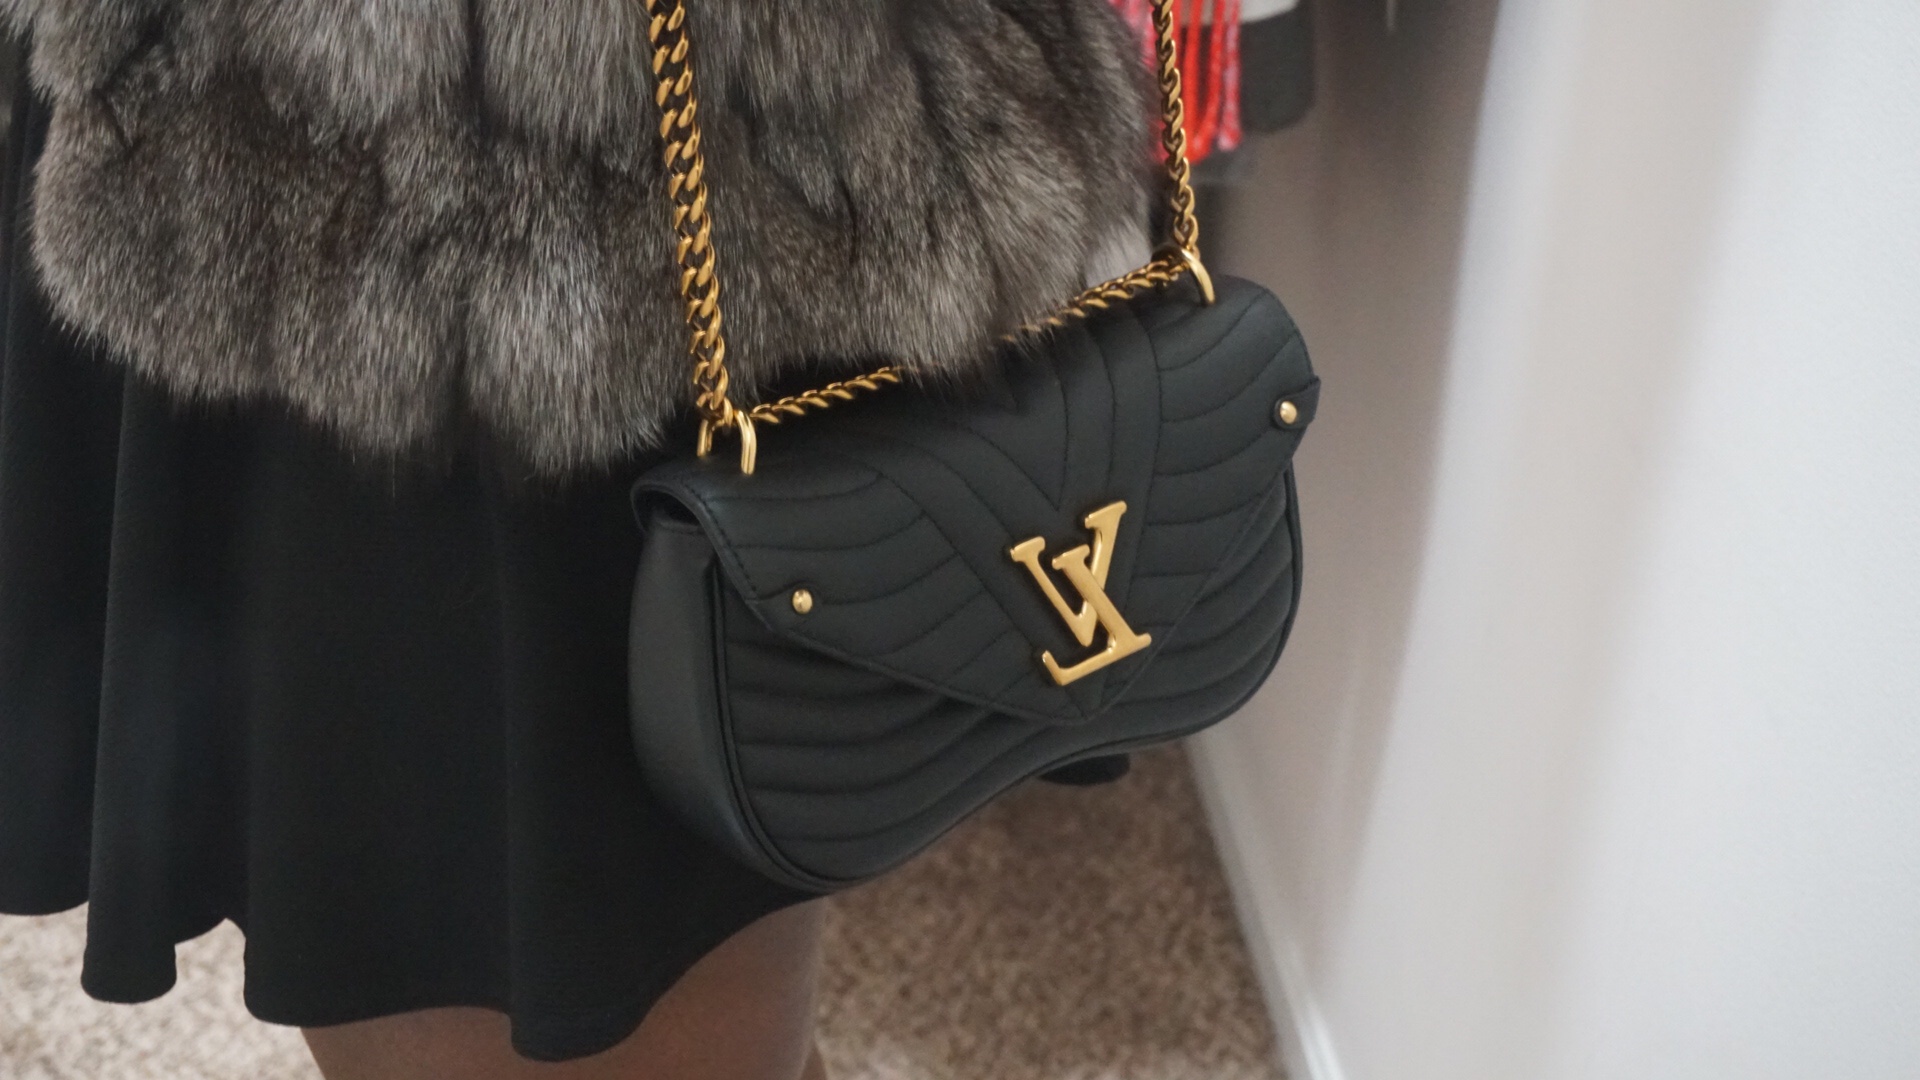 LOUIS VUITTON UNBOXING 2021! *New Chain Bag/Passy* + try-on and review! 